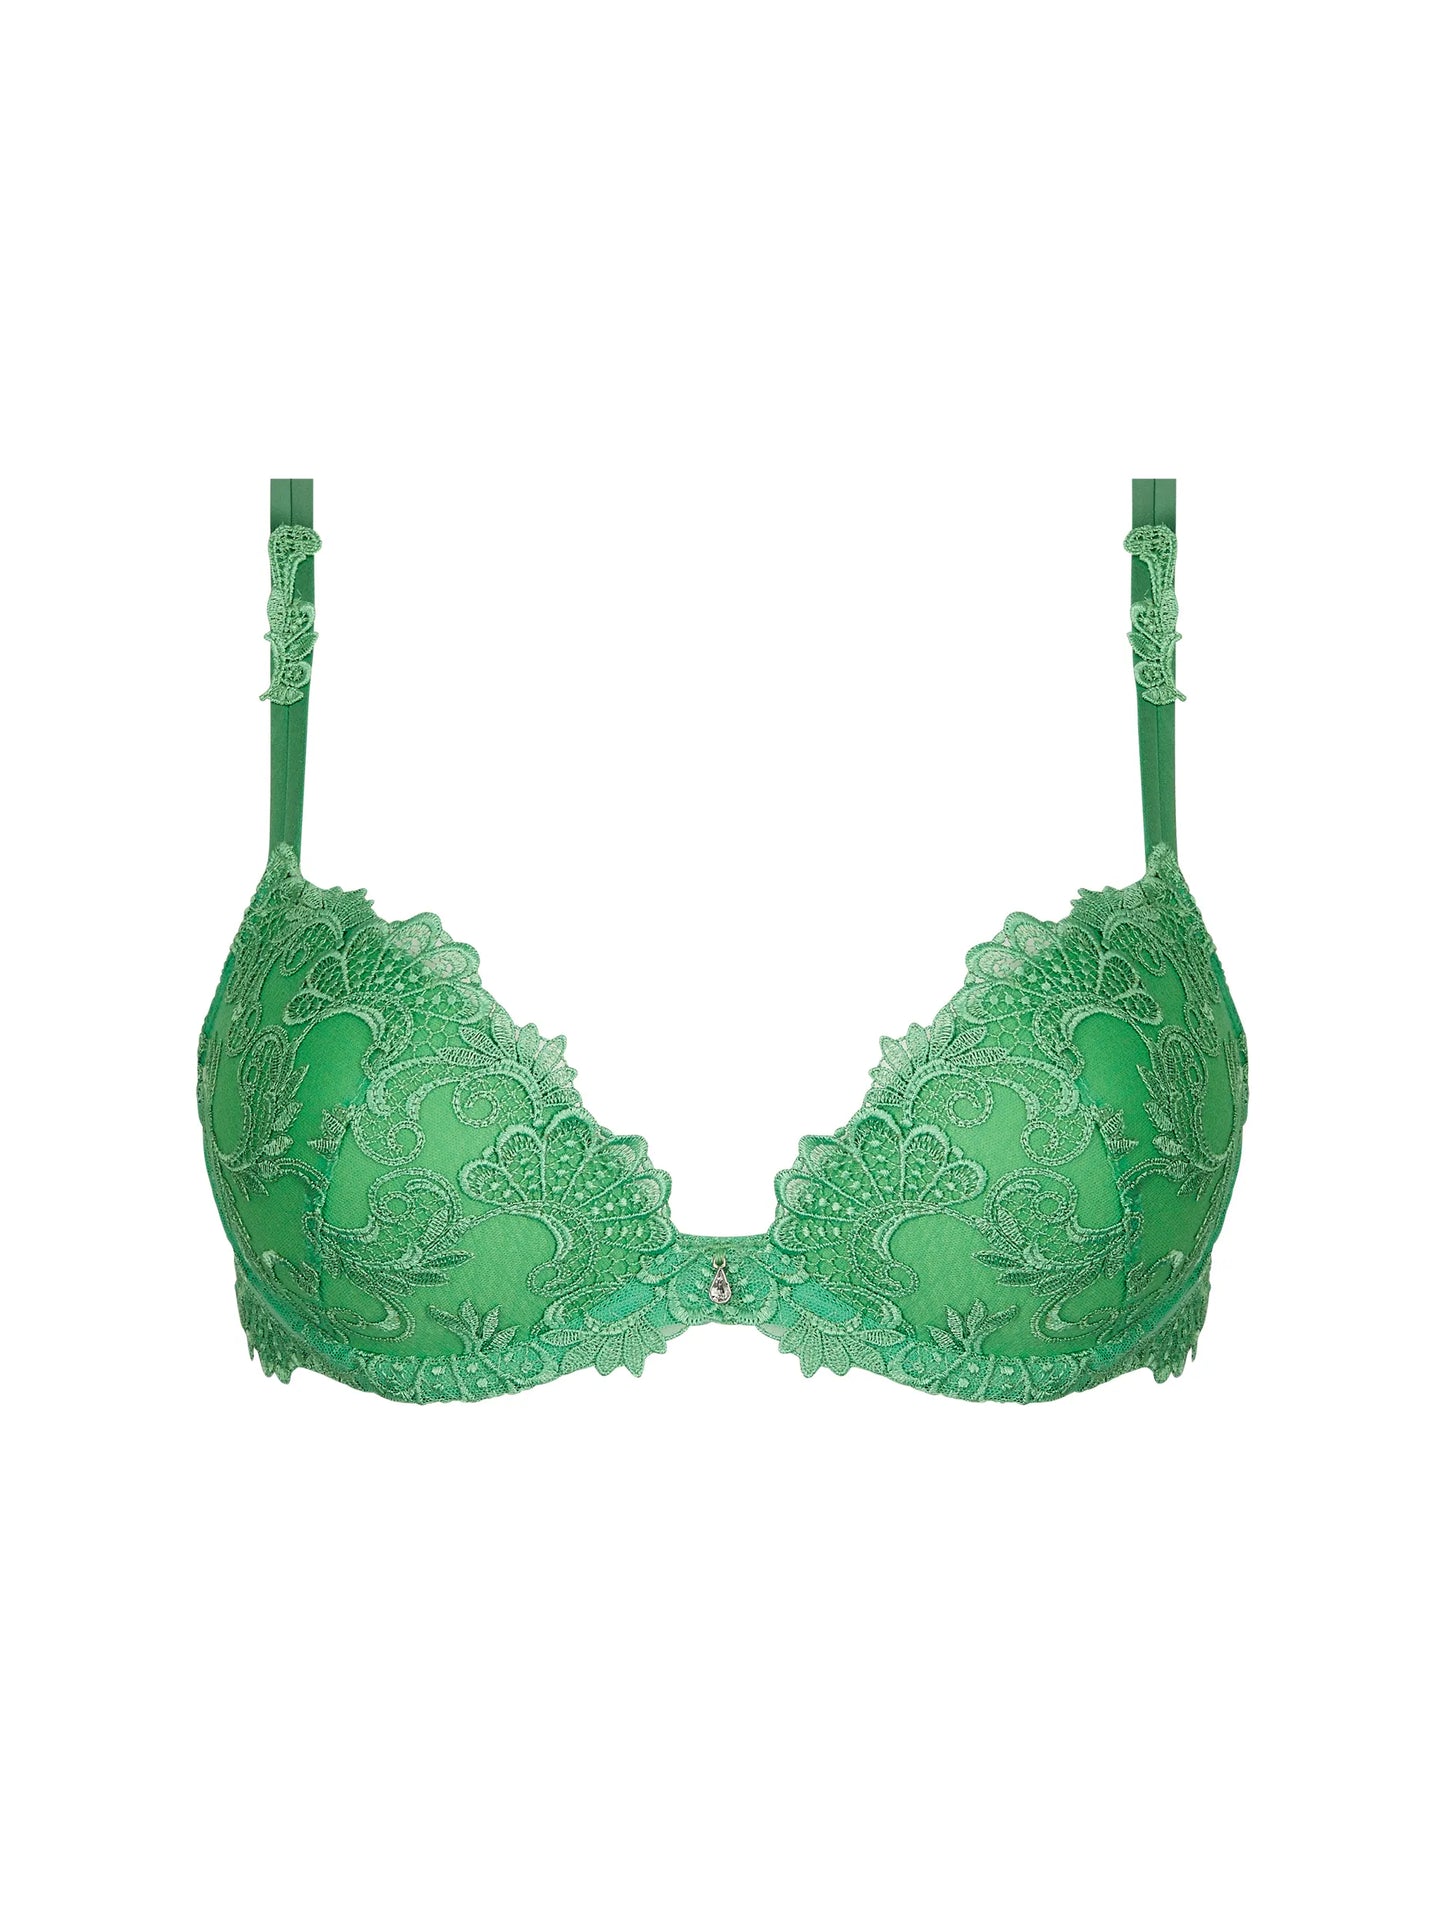 Dressing Floral in "Emeraude" Contour Bra By Lise Charmel - 32A & 34A